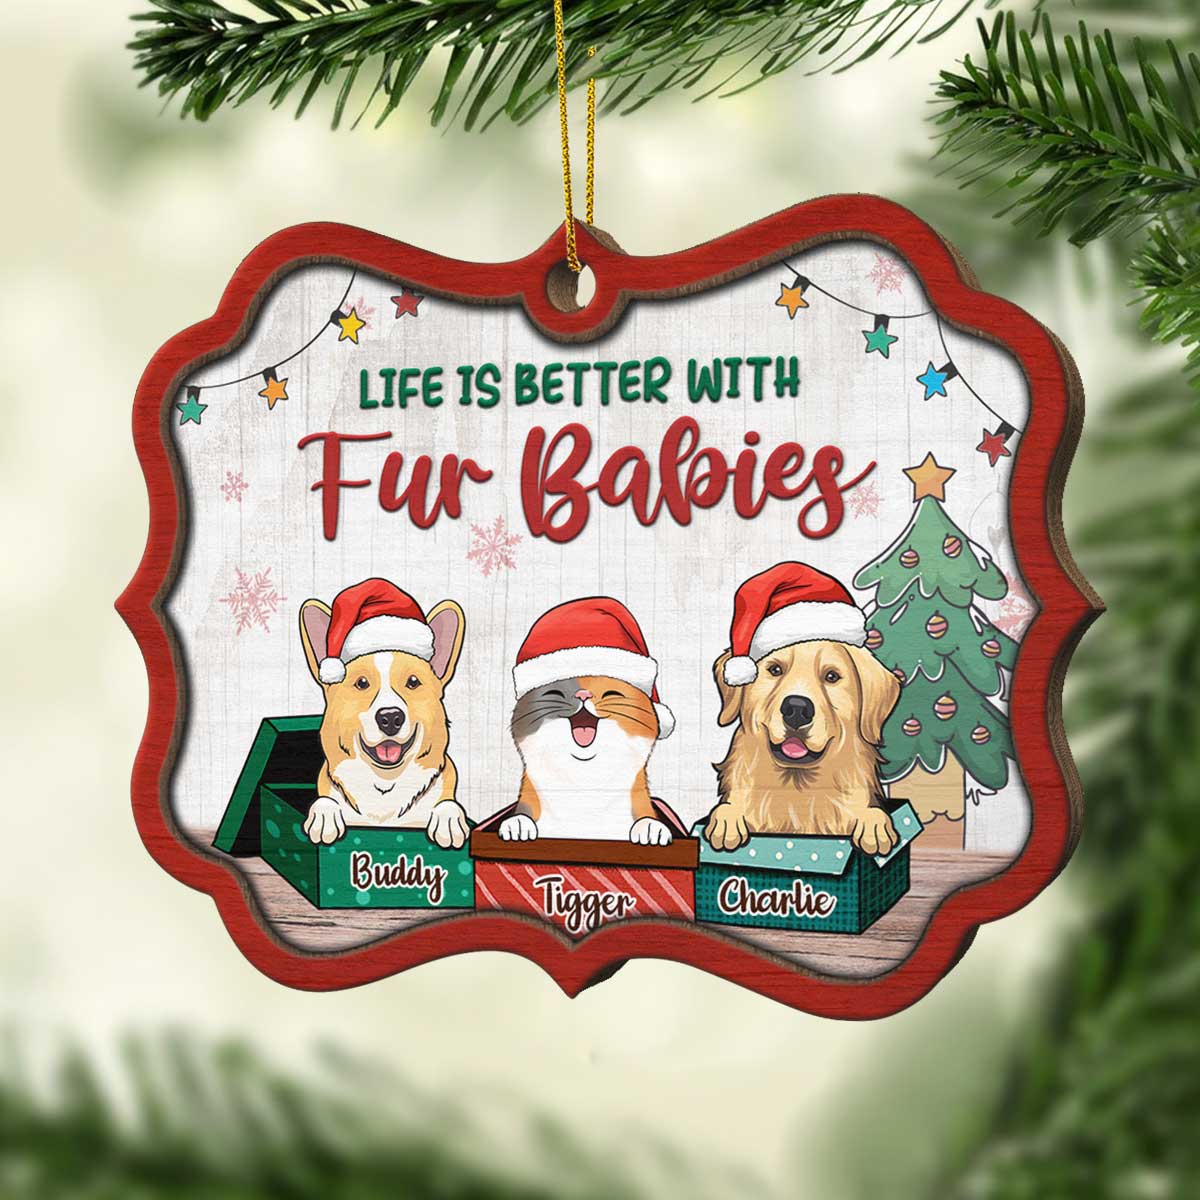 Life Is Better With Fur Babies - Personalized Shaped Ornament